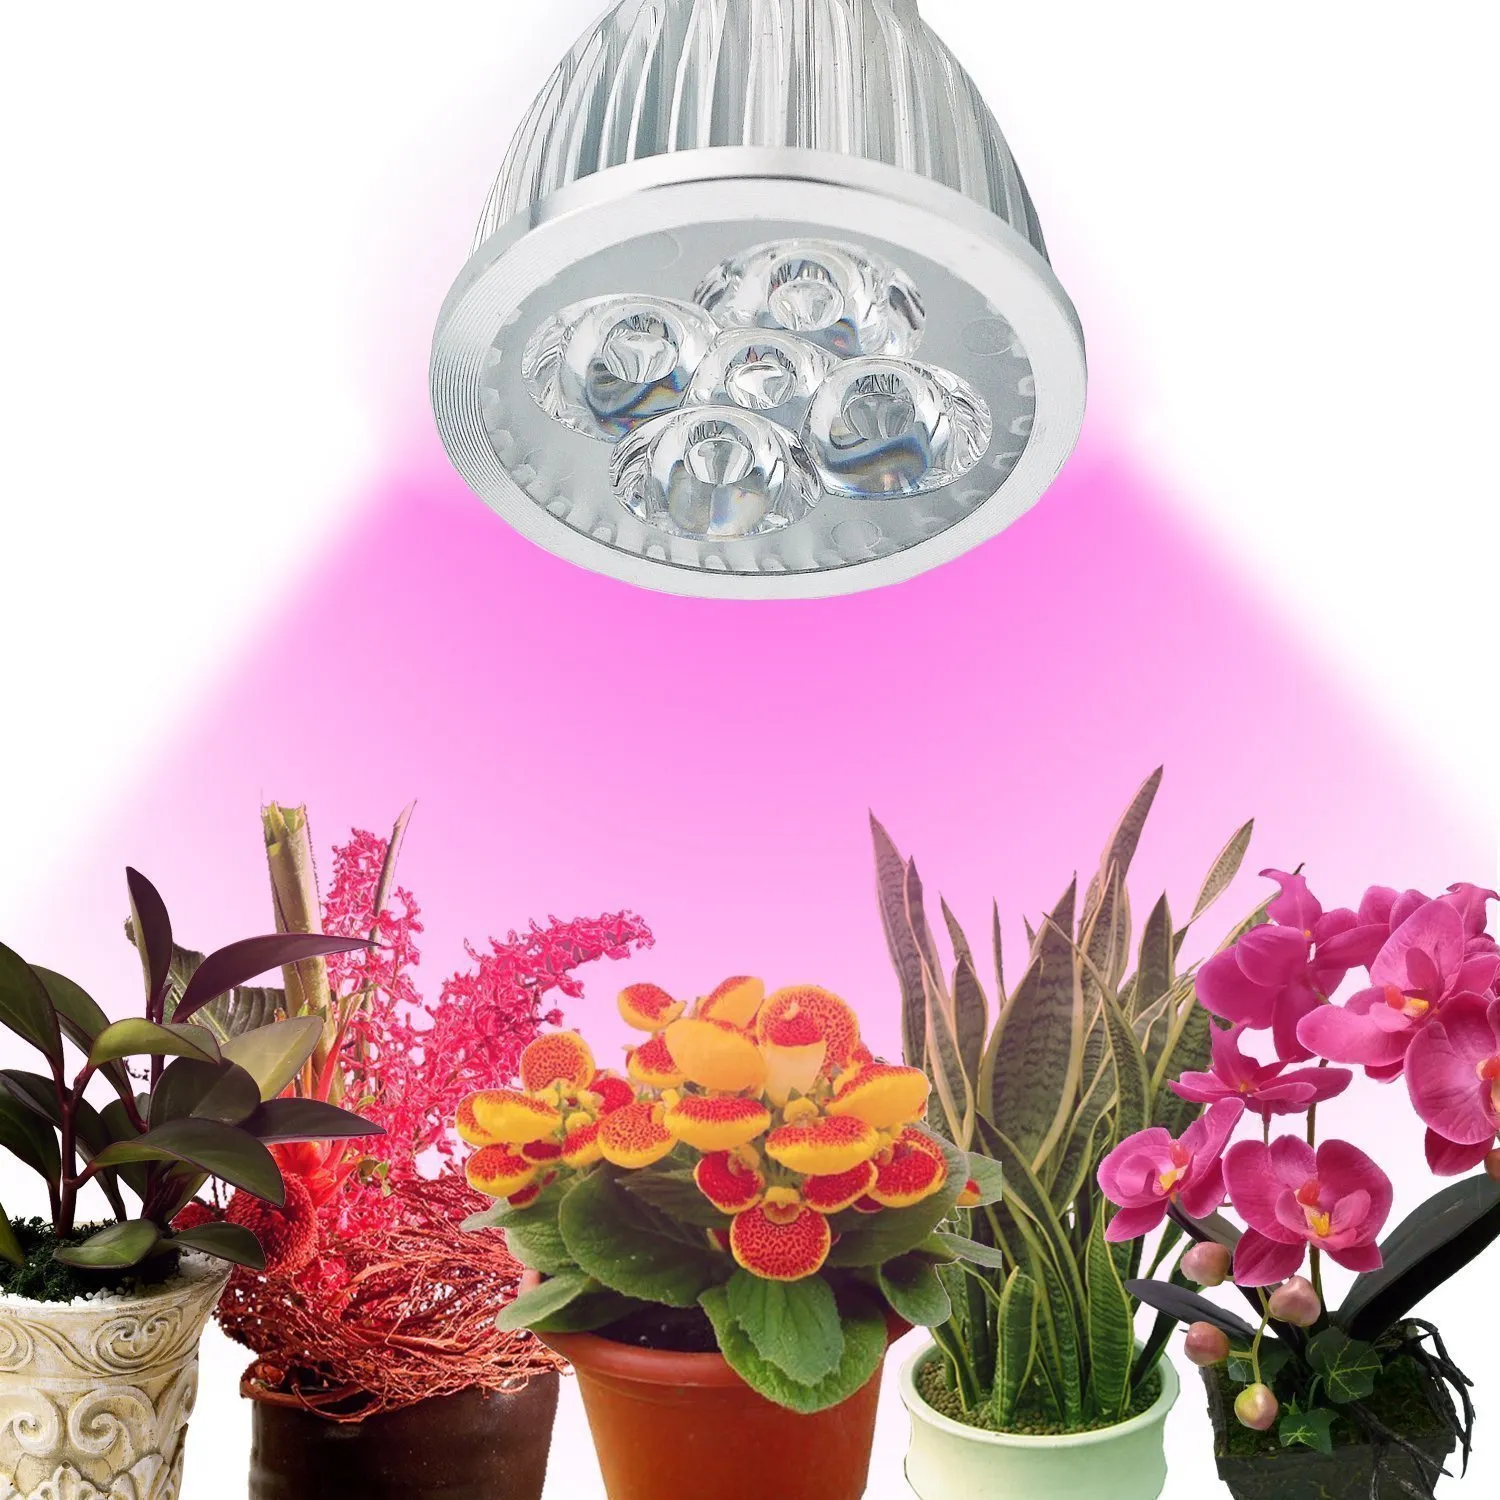 Led Plant Grow Light 5W E27 Lamp Red/Blue for Indoor Flower Hydroponics System